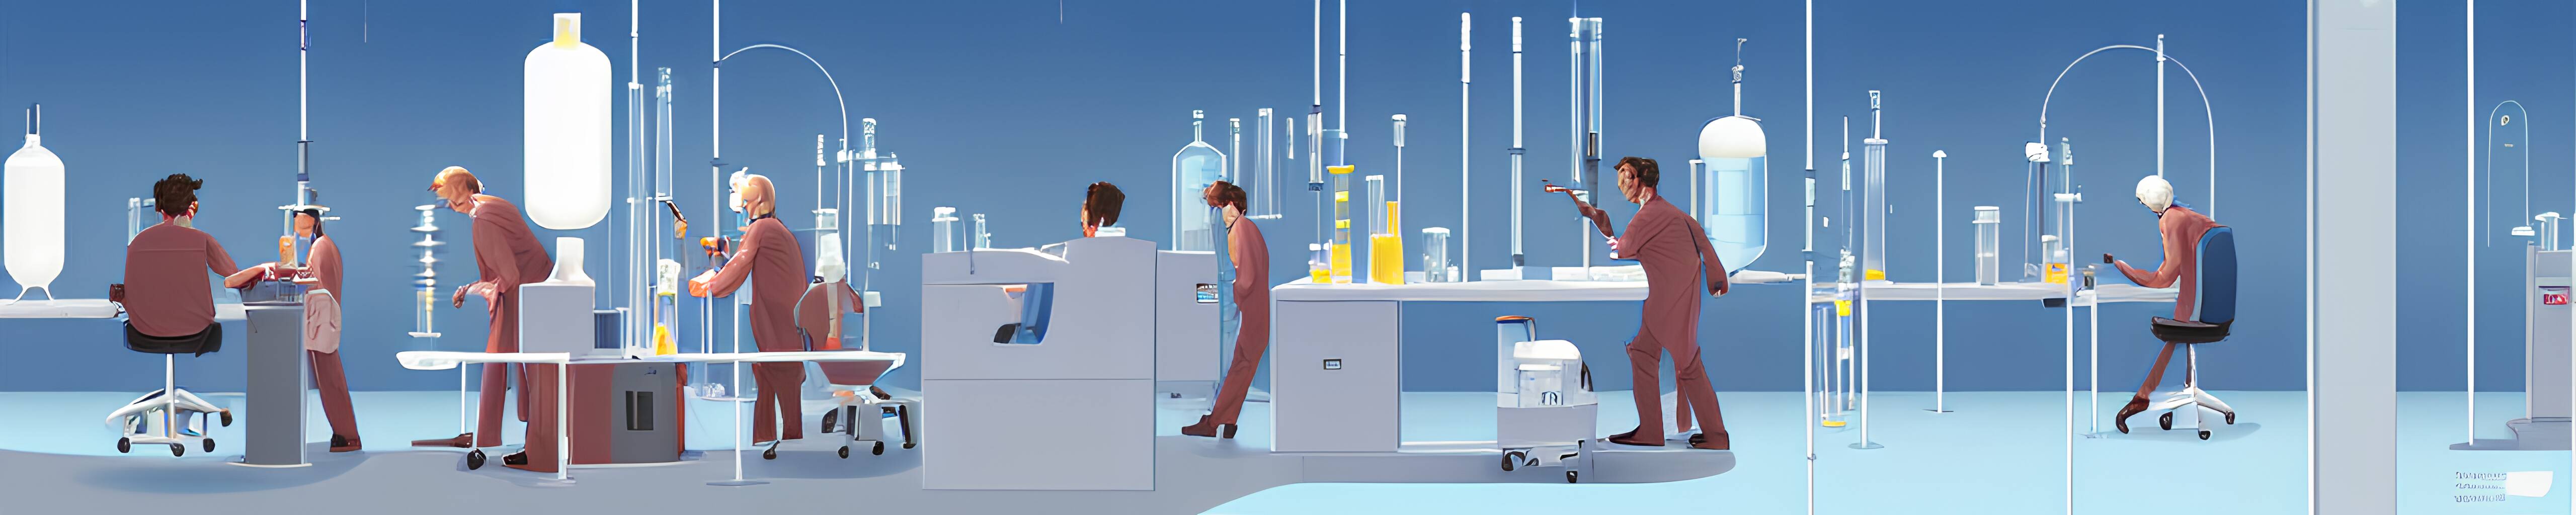 A comic book style illustration of researchers working in a laboratory.